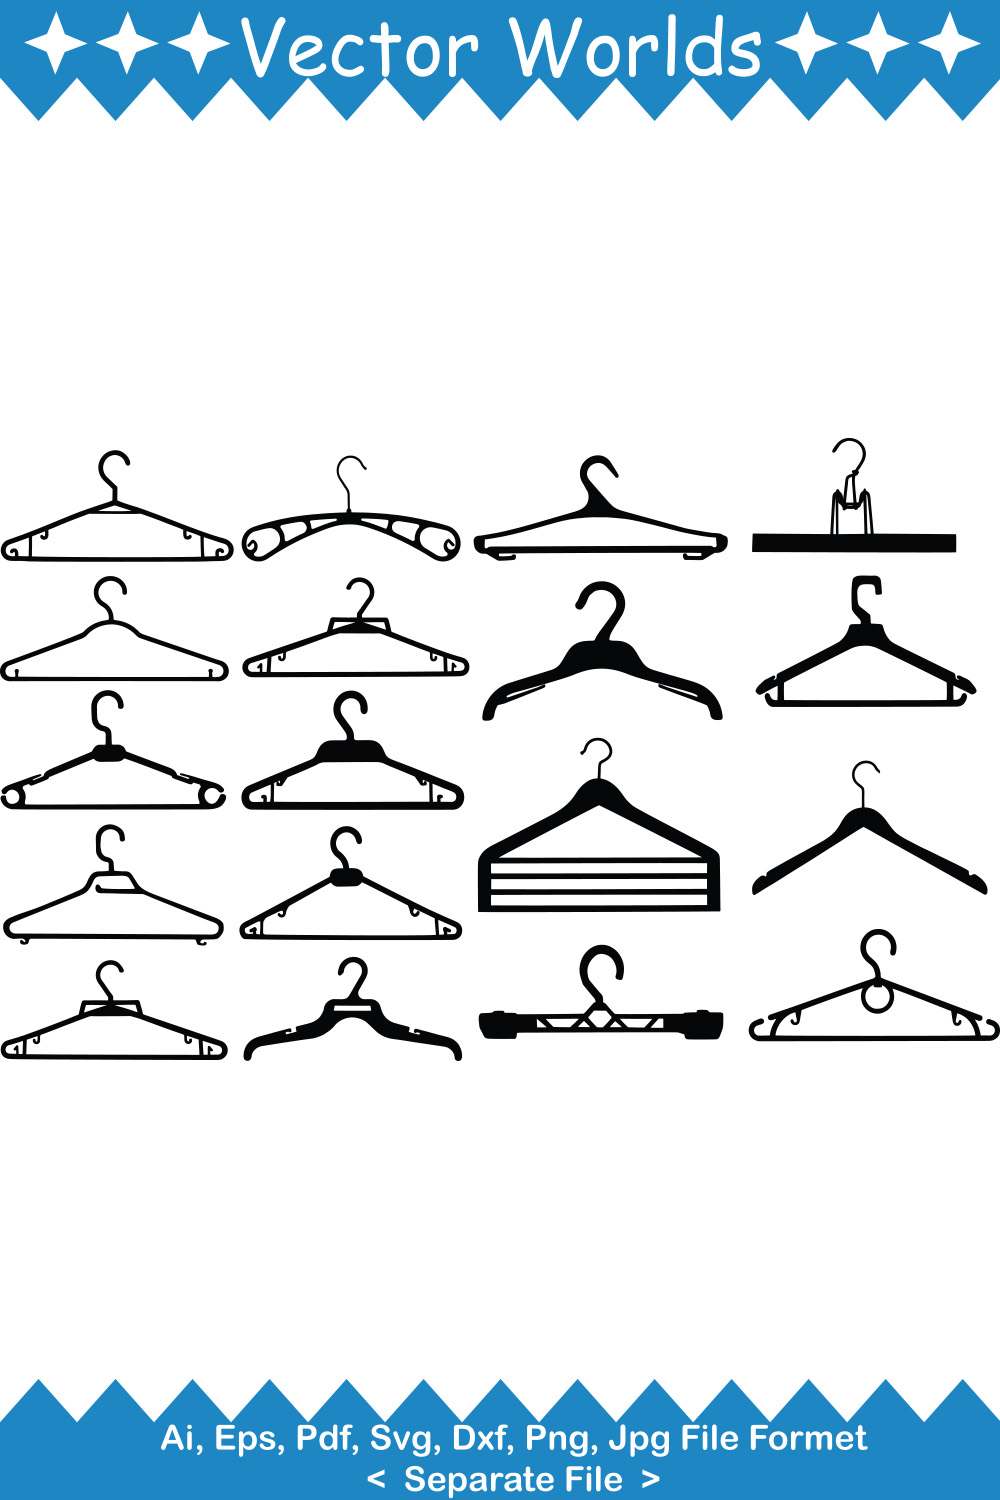 Set of beautiful vector images of clothes hanger silhouettes